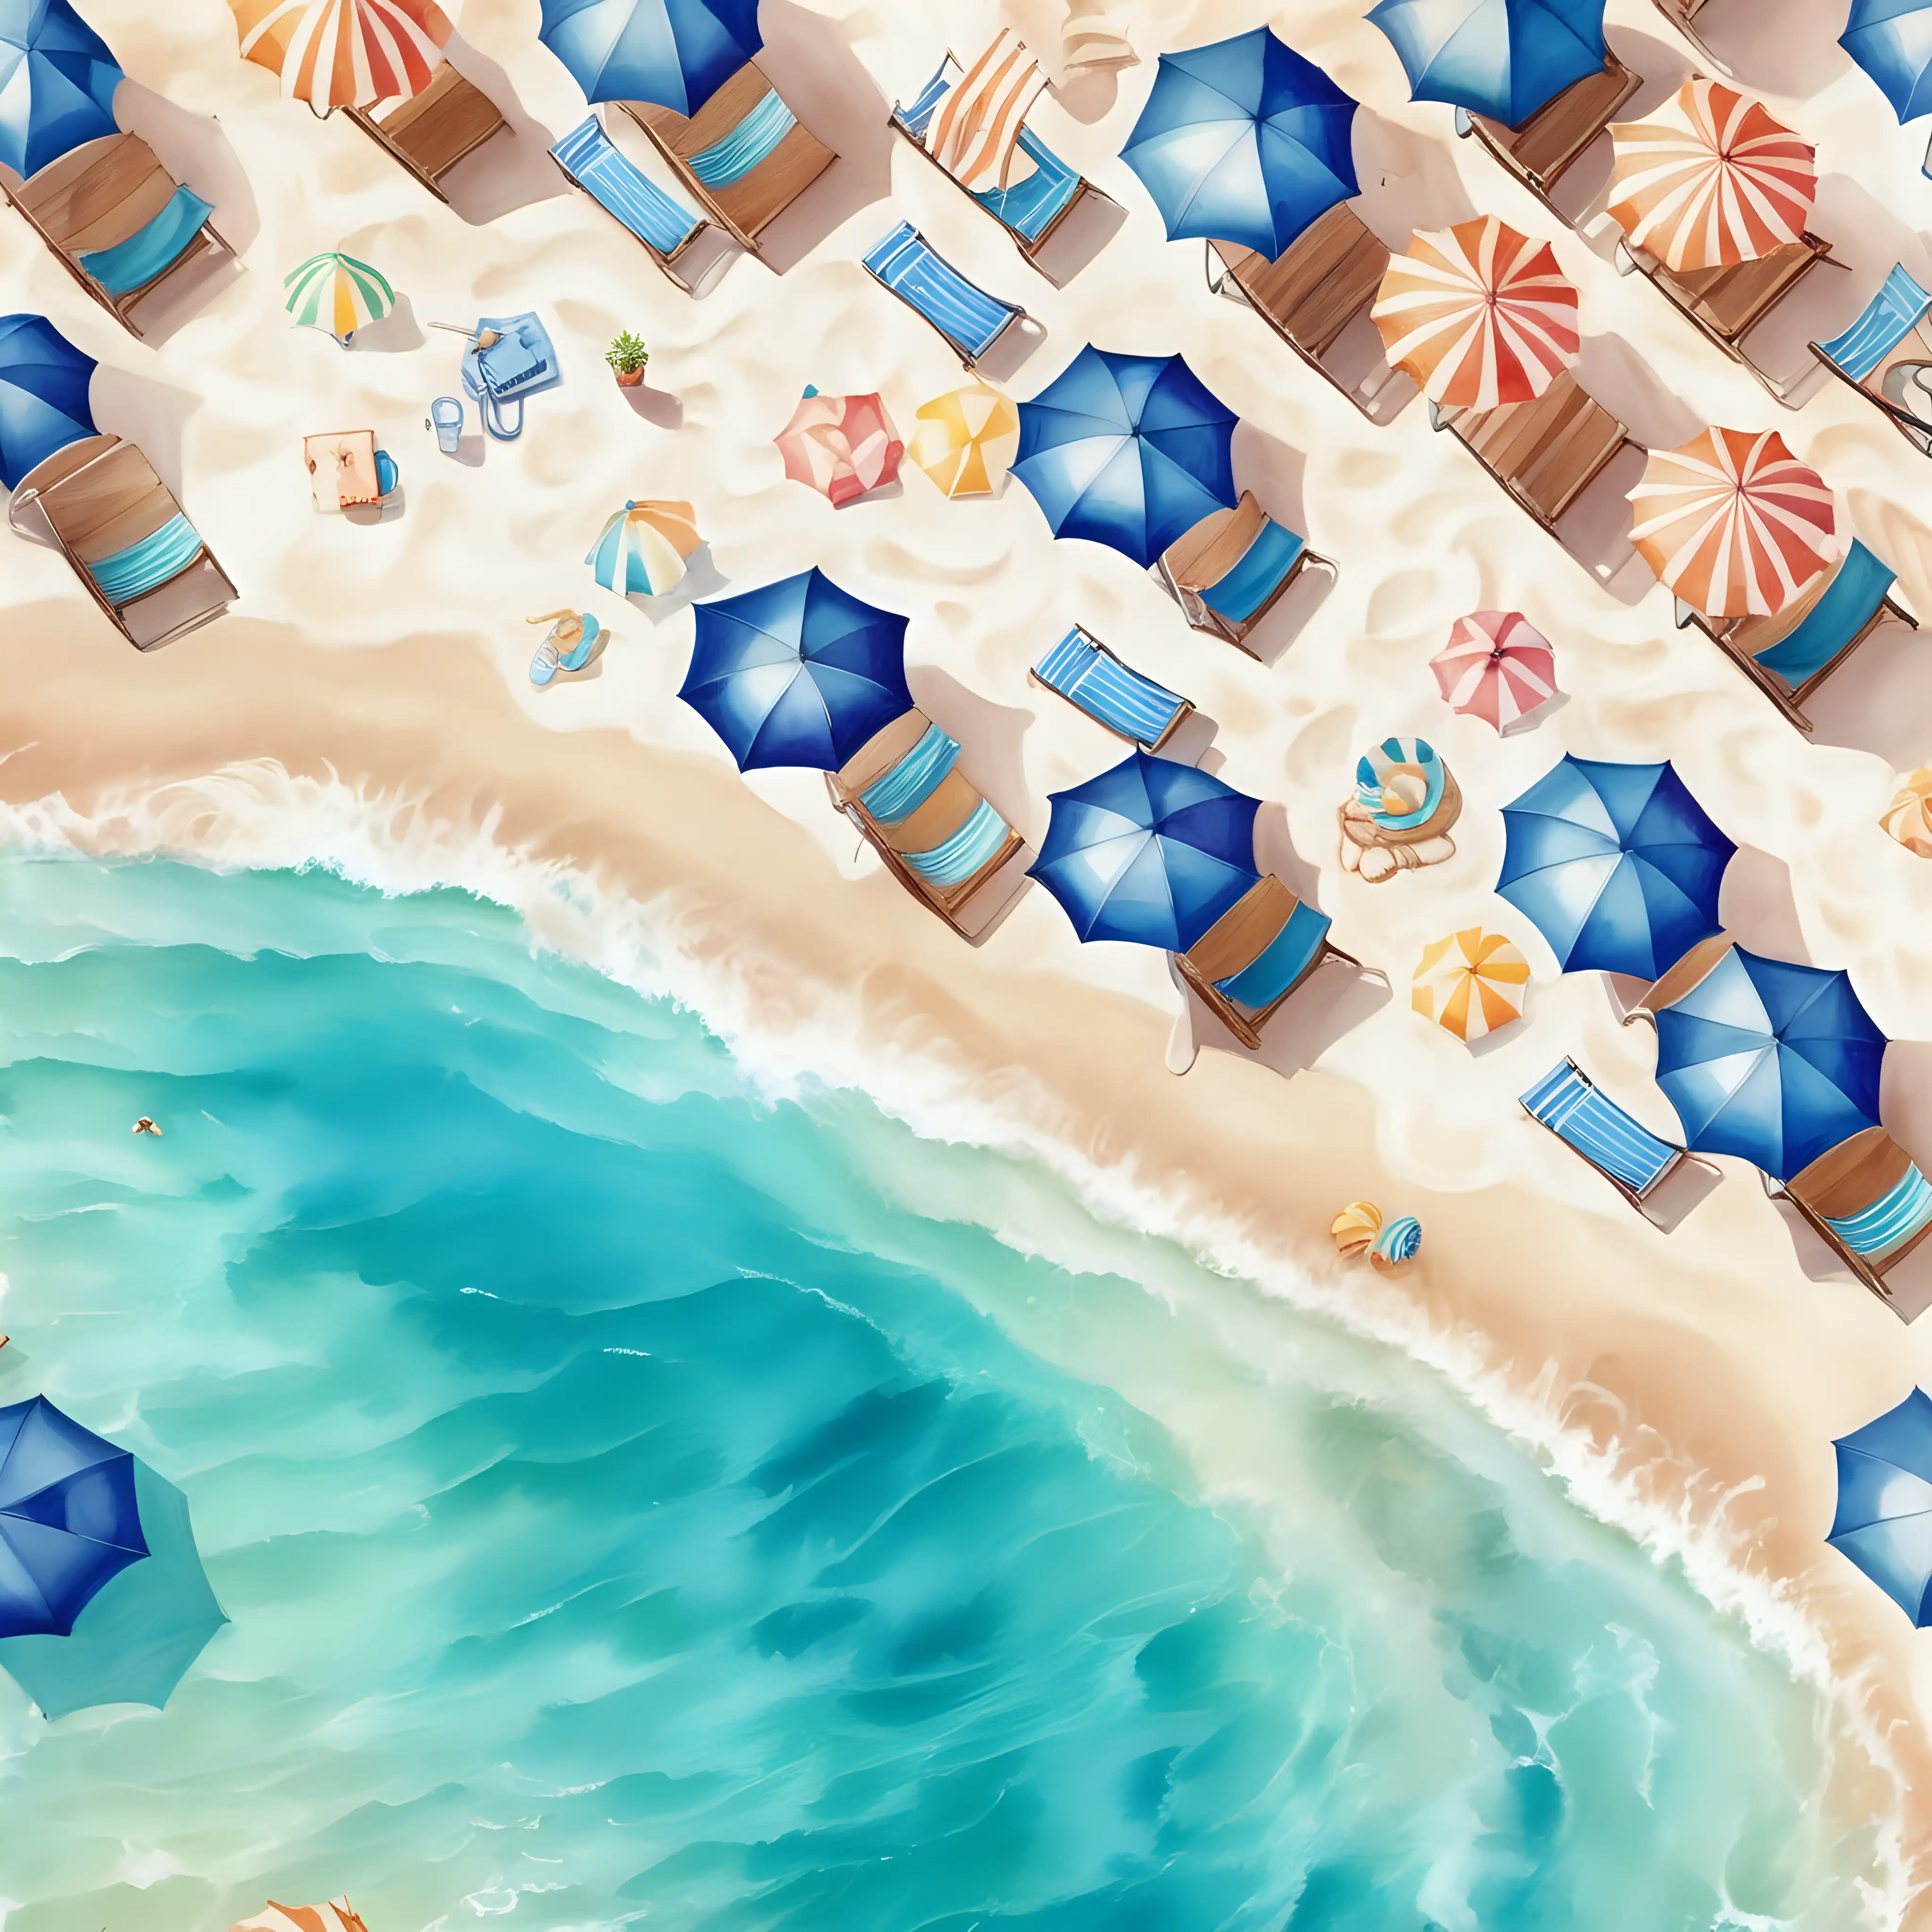 Top View Beach Scene with Colorful Umbrellas and Sunbeds